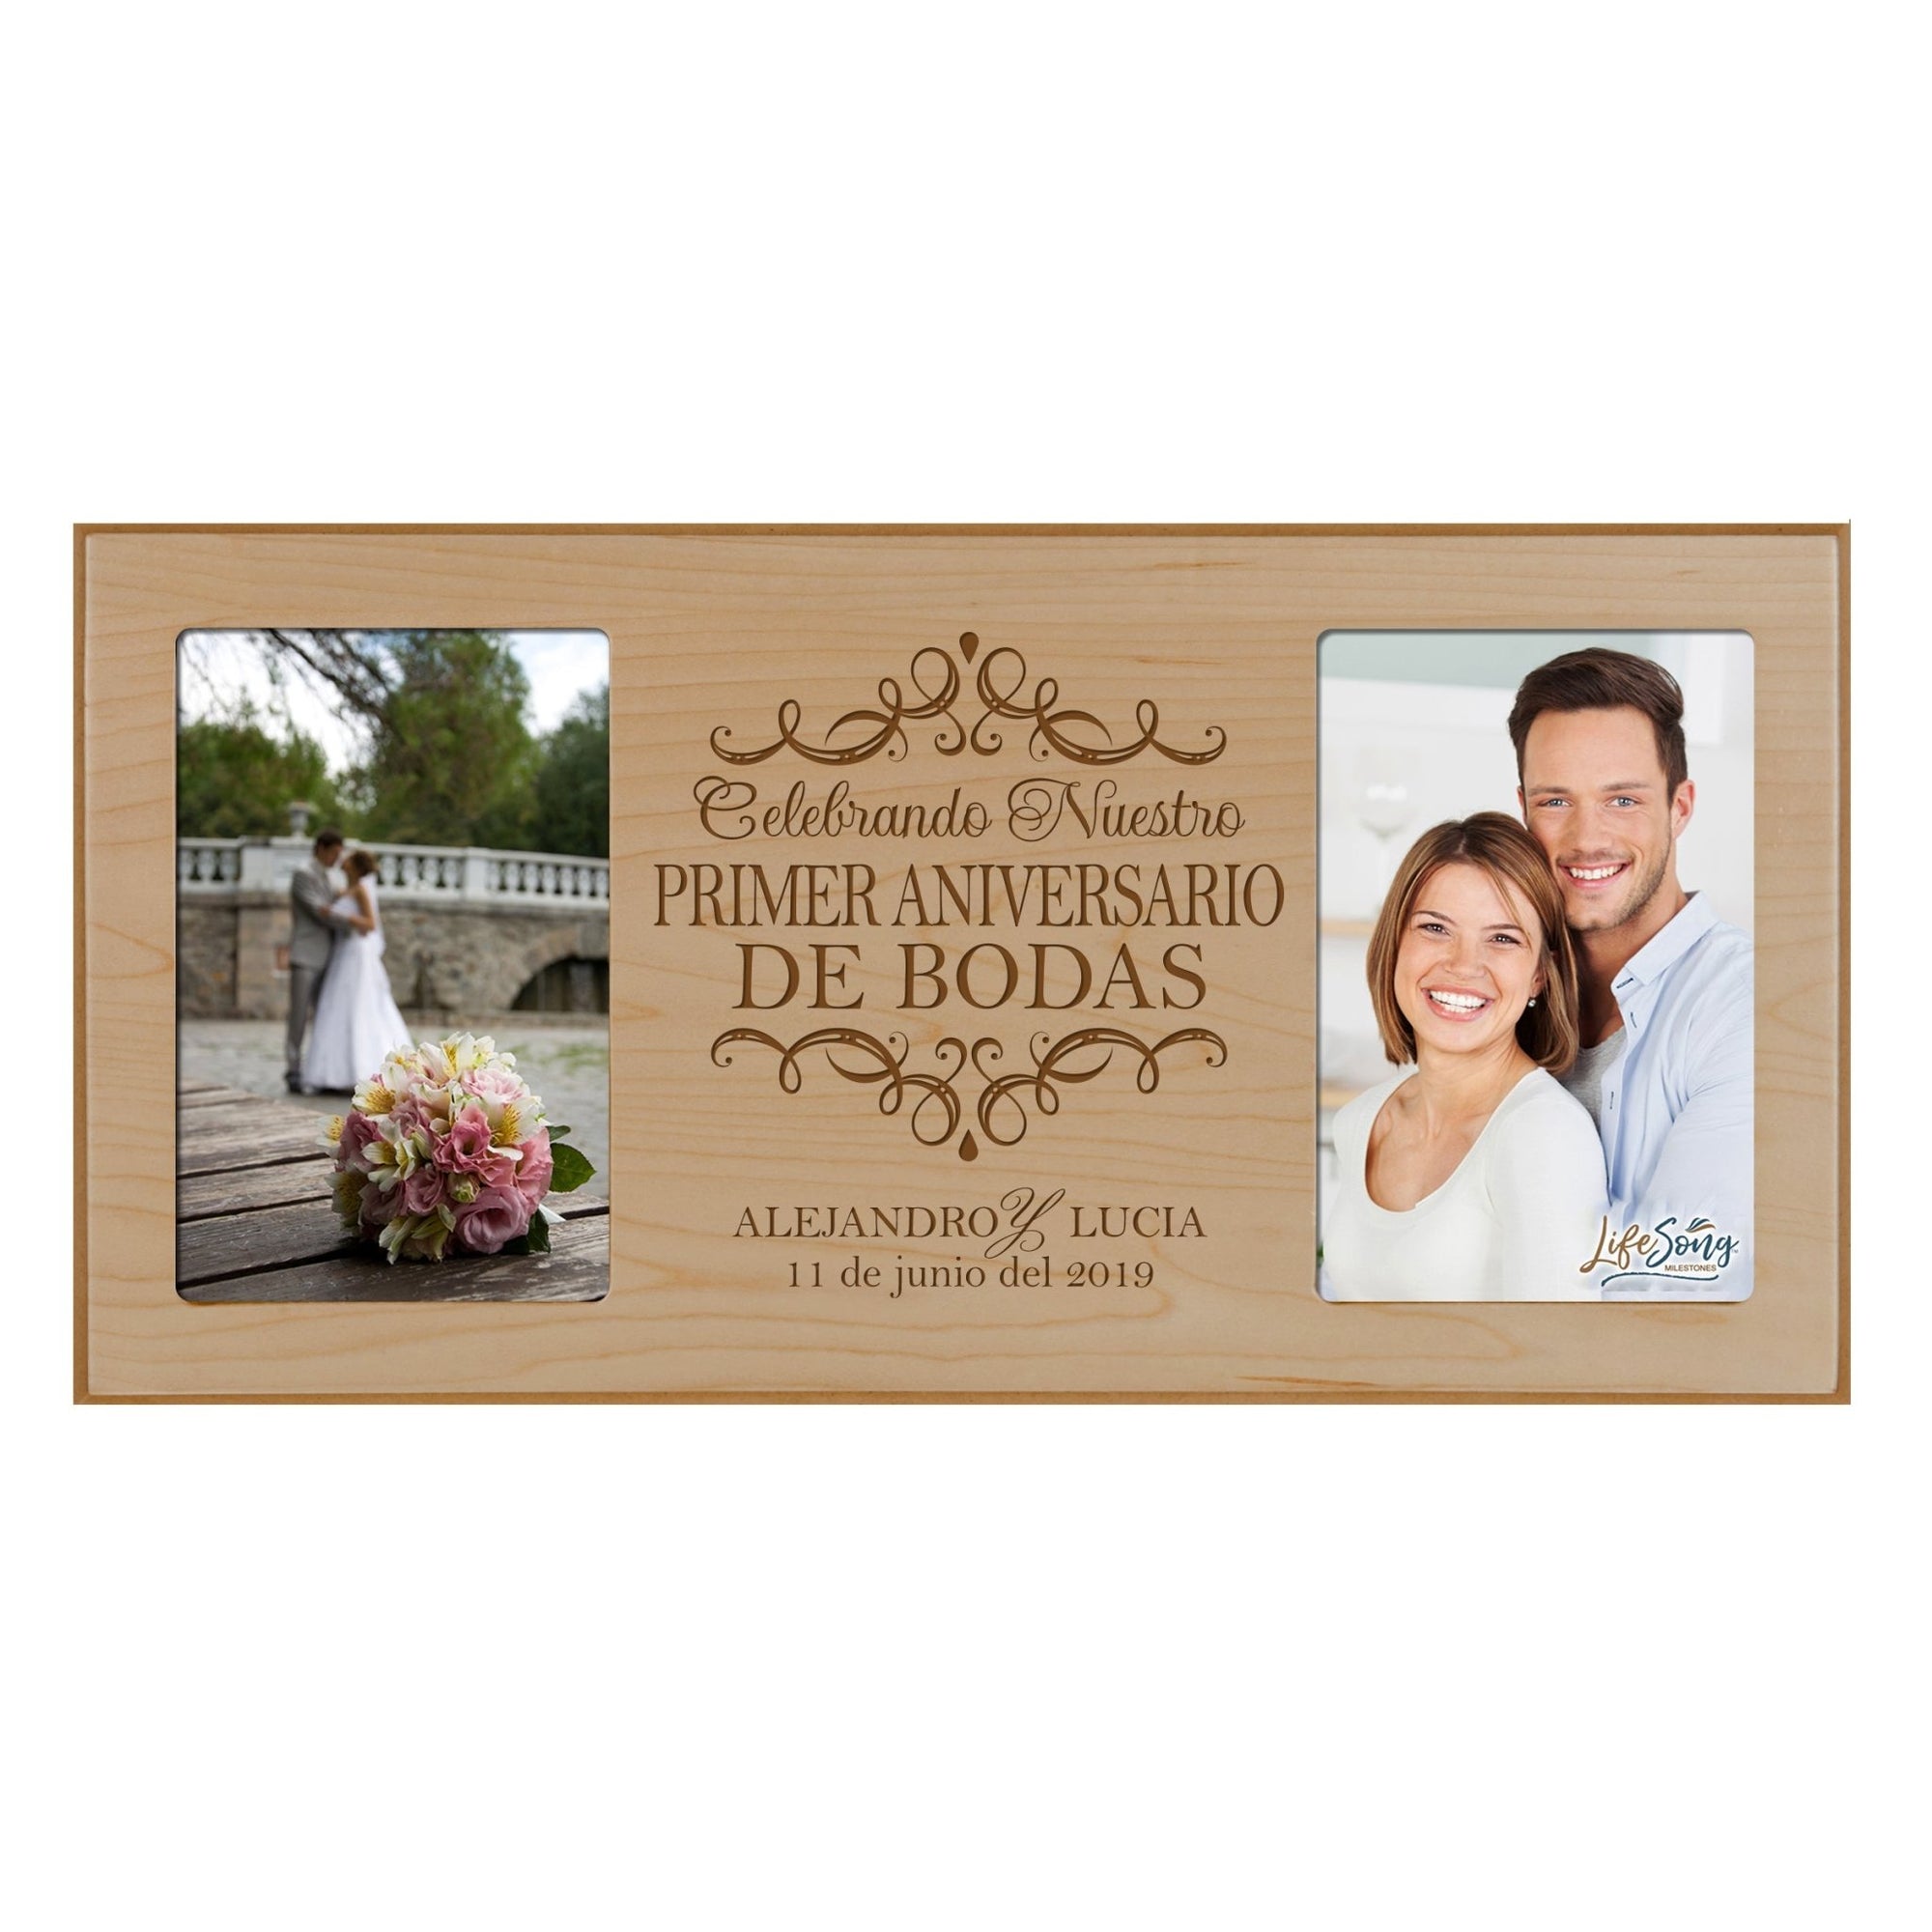 Personalized Picture Frame 1st Wedding Anniversary Spanish Gift Ideas